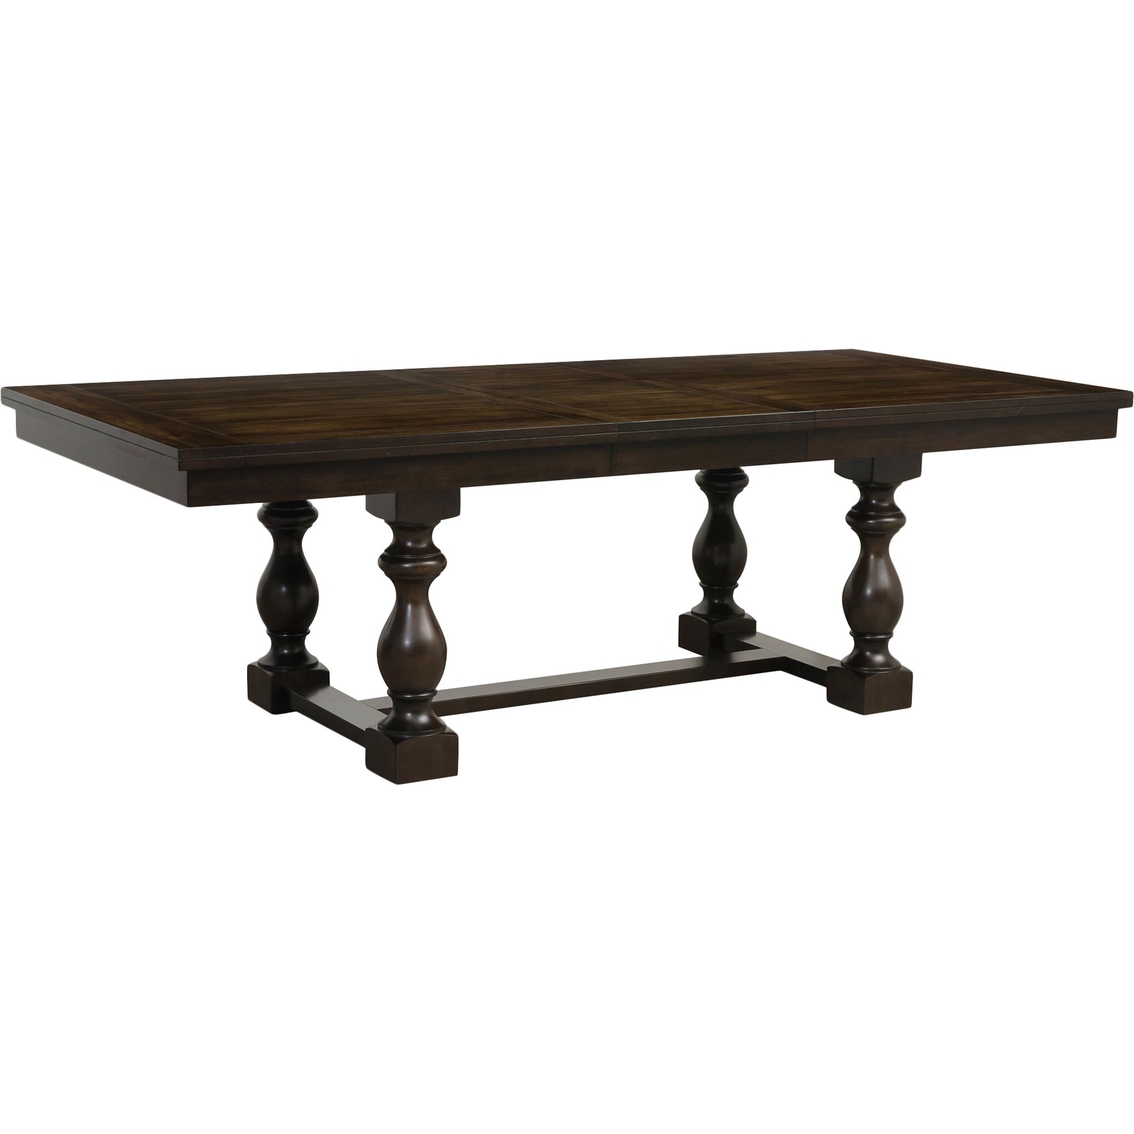 Homelegance Yates Dining Table | Dining Tables | Furniture & Appliances ...